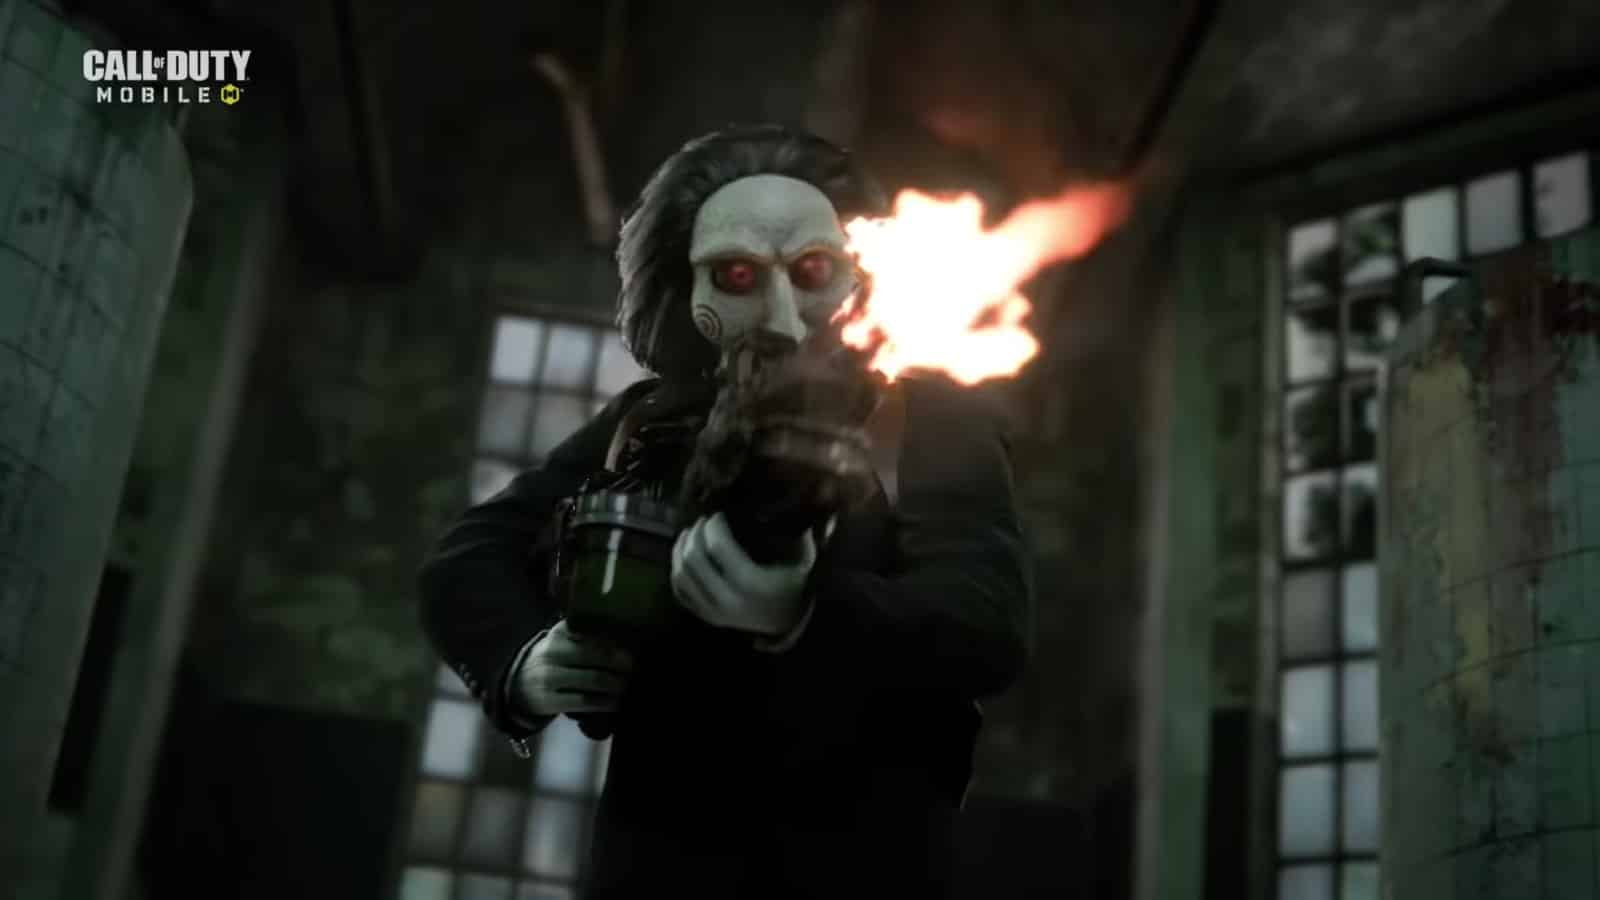 Billy the Puppet from Saw shooting a gun in CoD Mobile